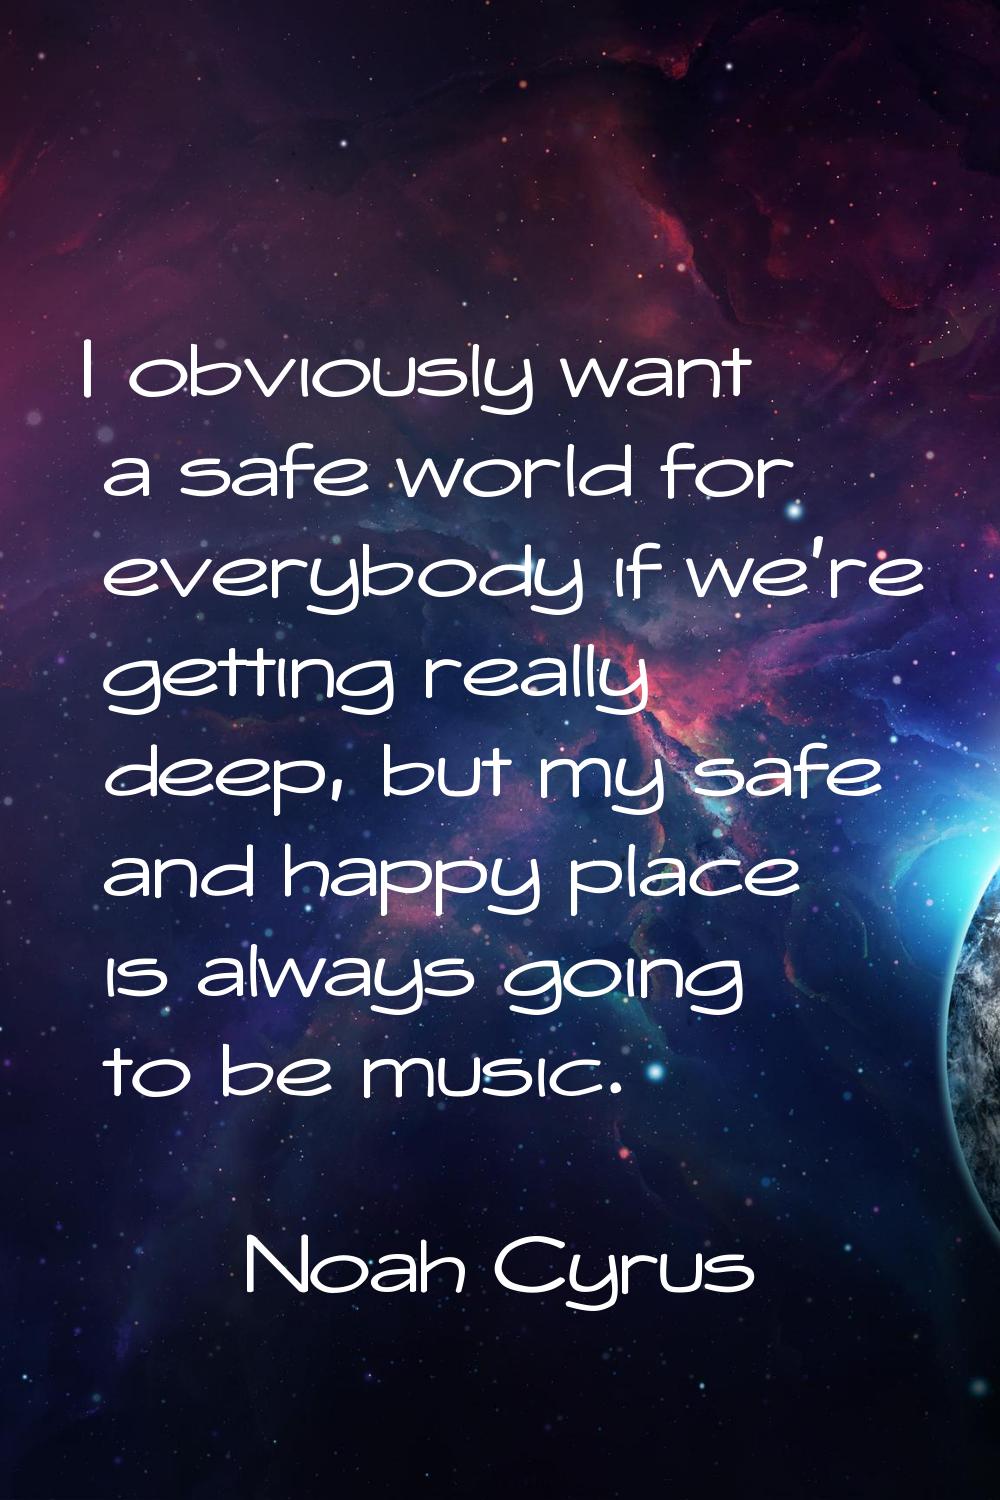 I obviously want a safe world for everybody if we're getting really deep, but my safe and happy pla